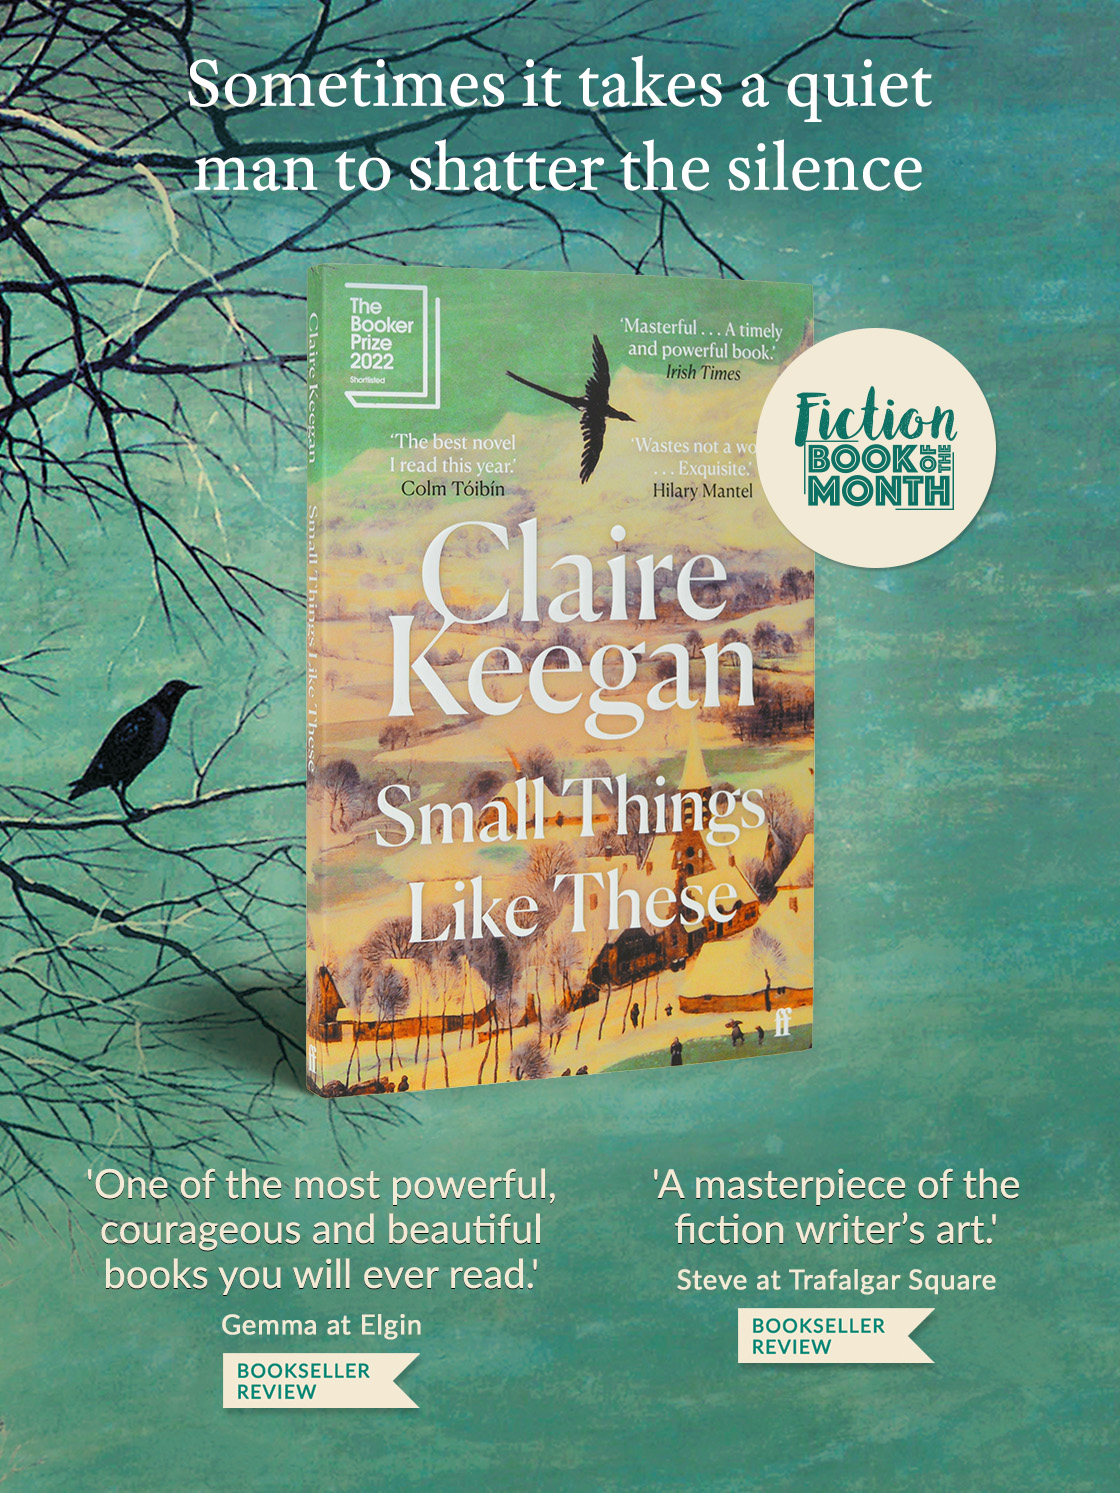 Small Things Like These by Claire Keegan | FICTION BOOK OF THE MONTH | Sometimes it takes a quiet man to shatter the silence | ‘A masterpiece of the fiction writer’s art.’ Steve at Trafalgar Square | 'One of the most powerful, courageous and beautiful books you will ever read.' Gemma at Elgin Wl - 4 N 4 Y Masterful .. A timely ELL TR Colm Tibin o 'One of the most powerful, 'A masterpiece of the courageous and beautiful fiction writer's art. books you will ever read! S R O T Gemma at Elgin BOOKSELLER REVIEW BOOKSELLER REVIEW 